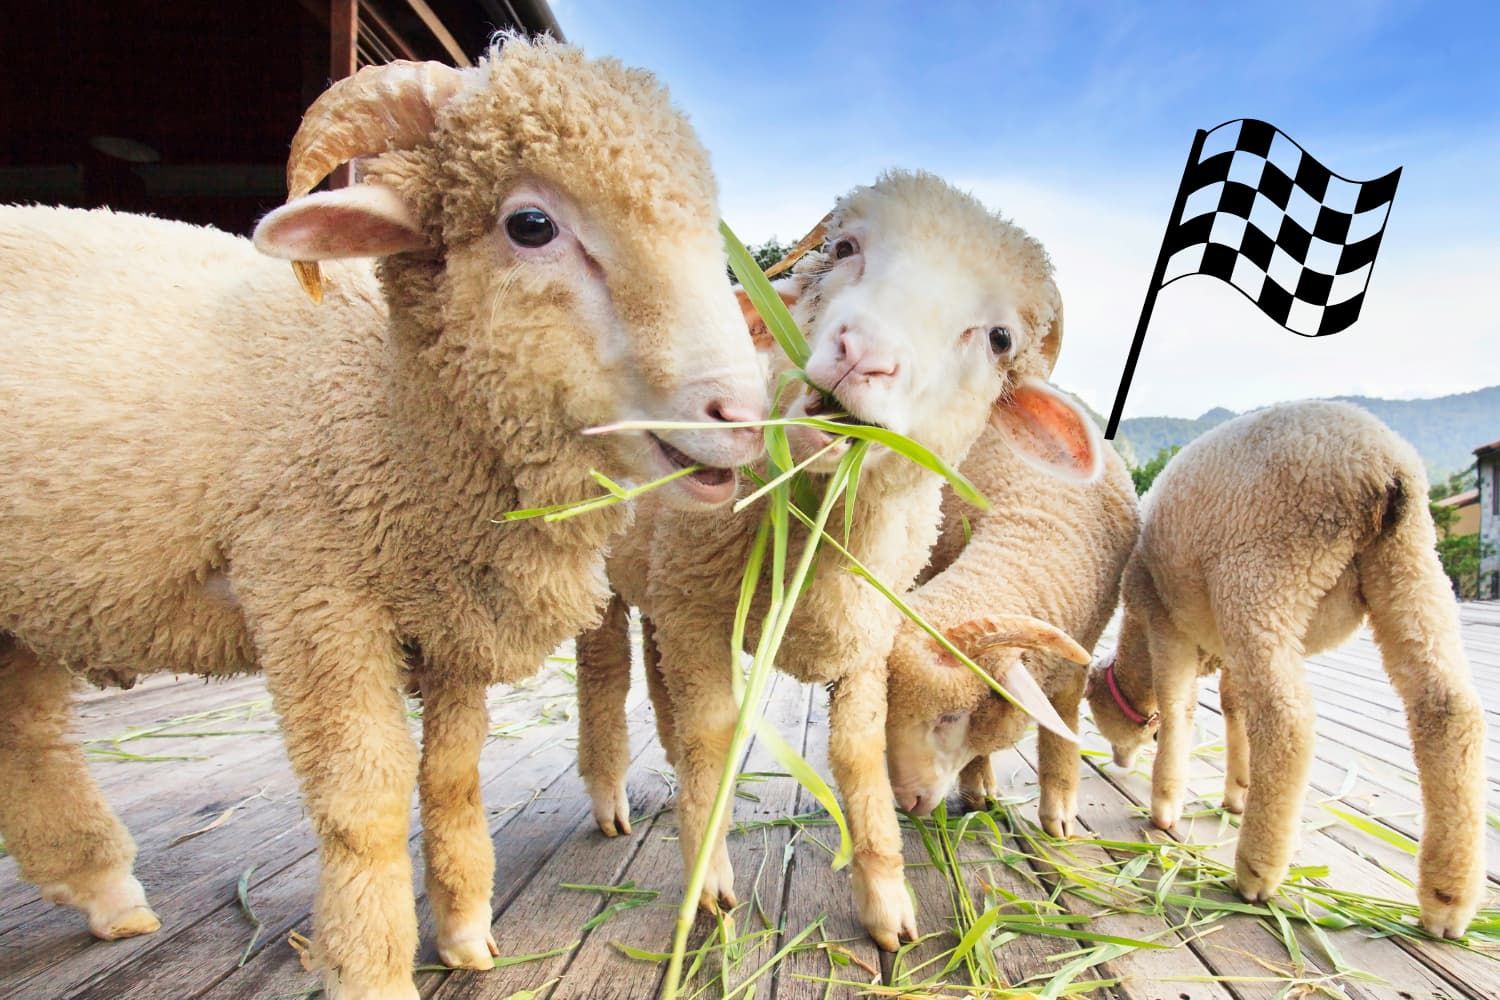 Game%20-%20OT%20Psalm%2023%20-%20The%20feed%20the%20sheep%20relay%20race-6bb58723 Mourning / grief